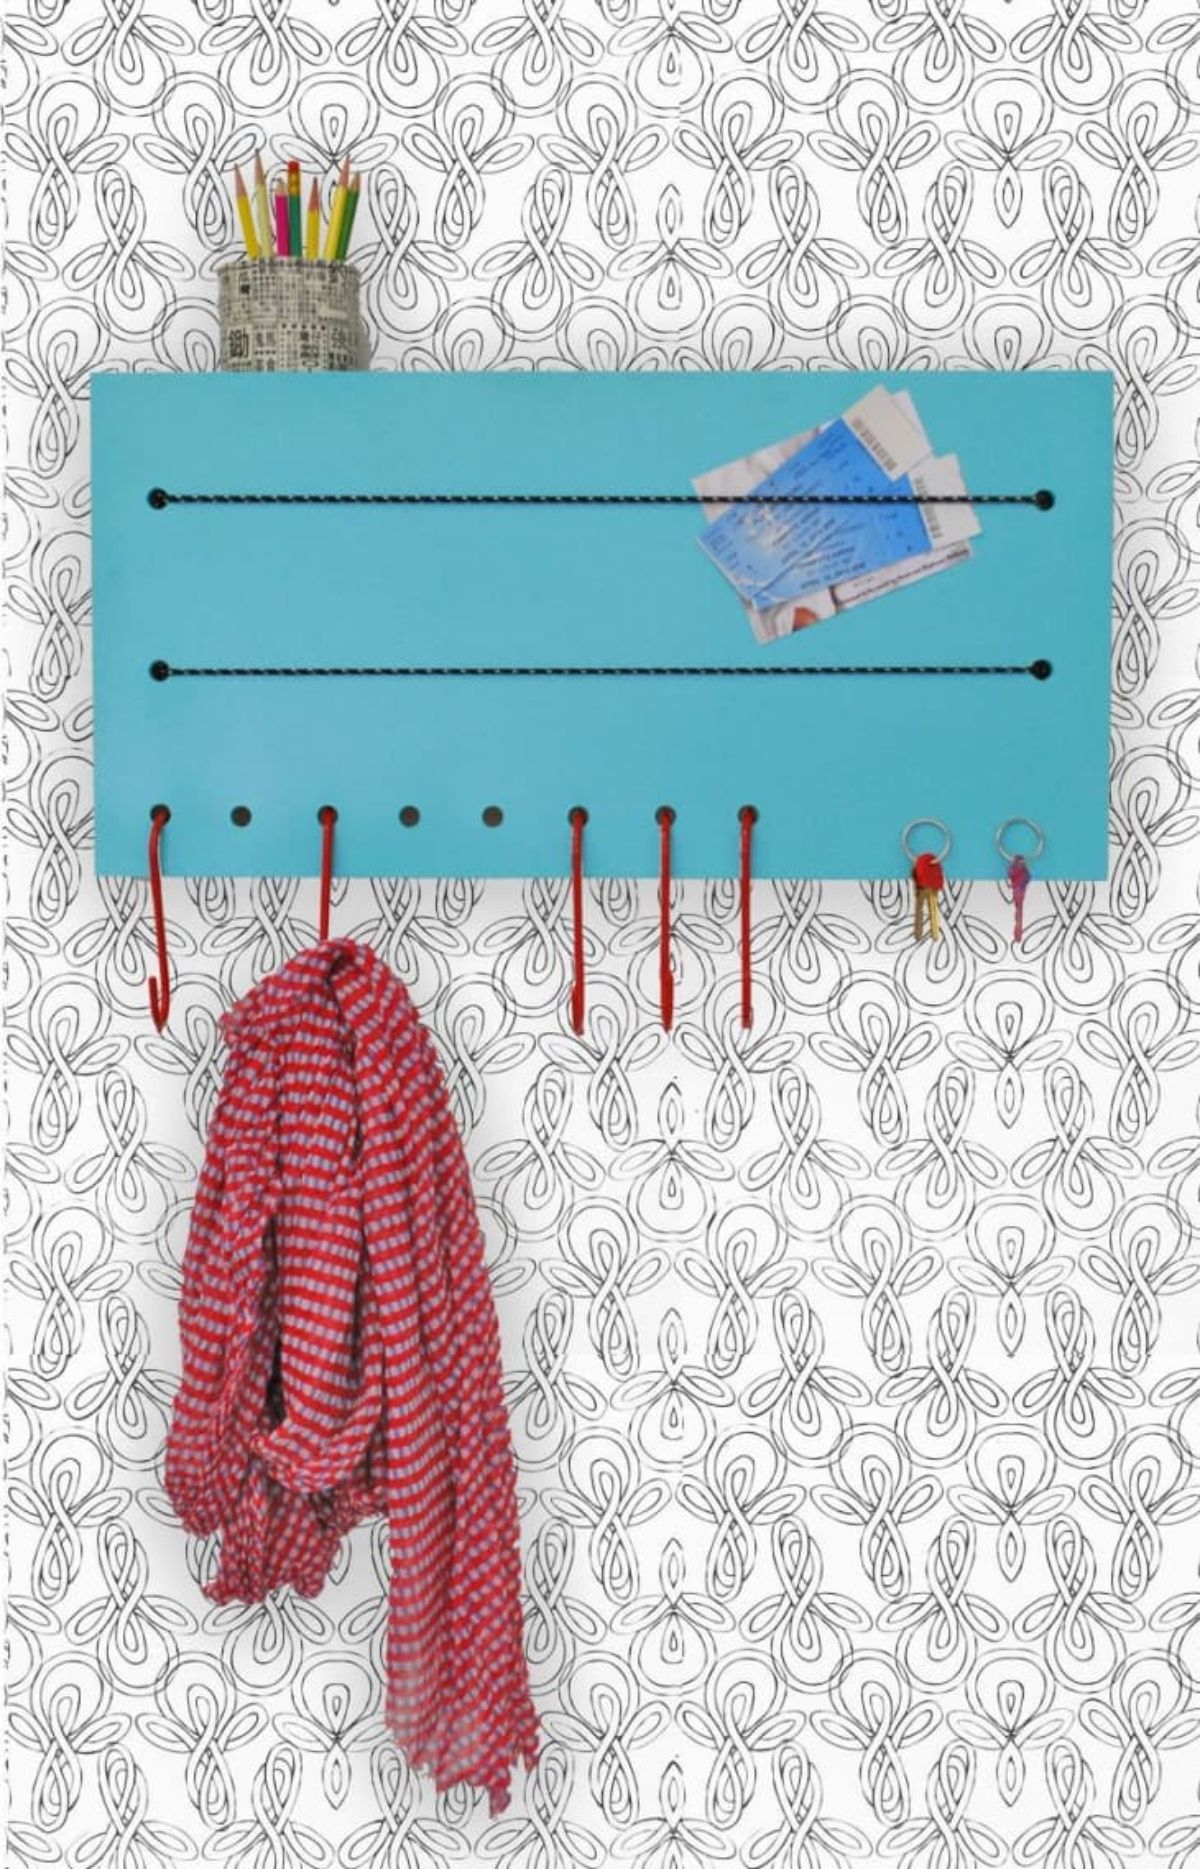 Small Entryway Wall Organizer with magnets